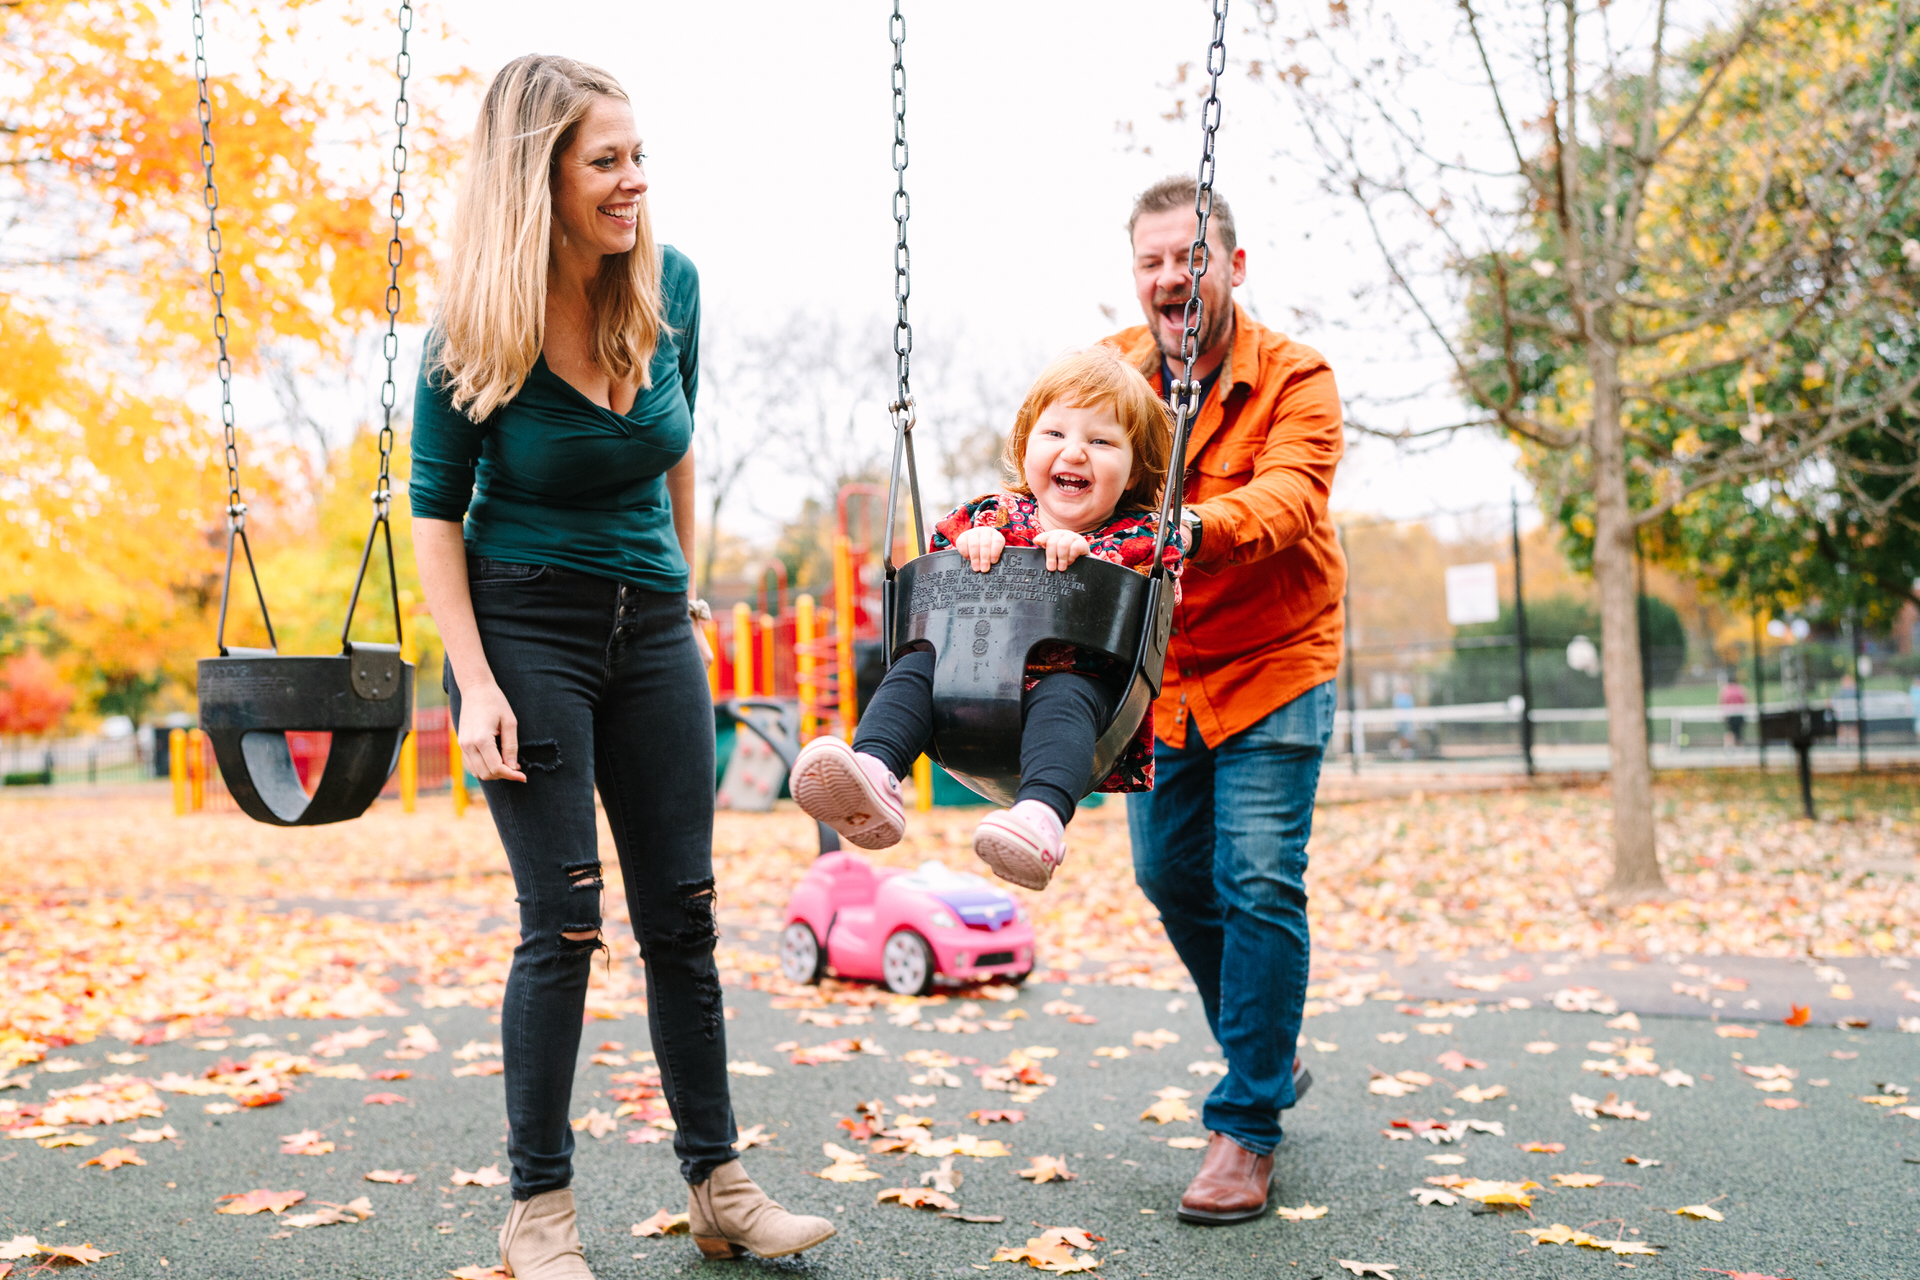 A mom and dad push their redhead daughter on a swing